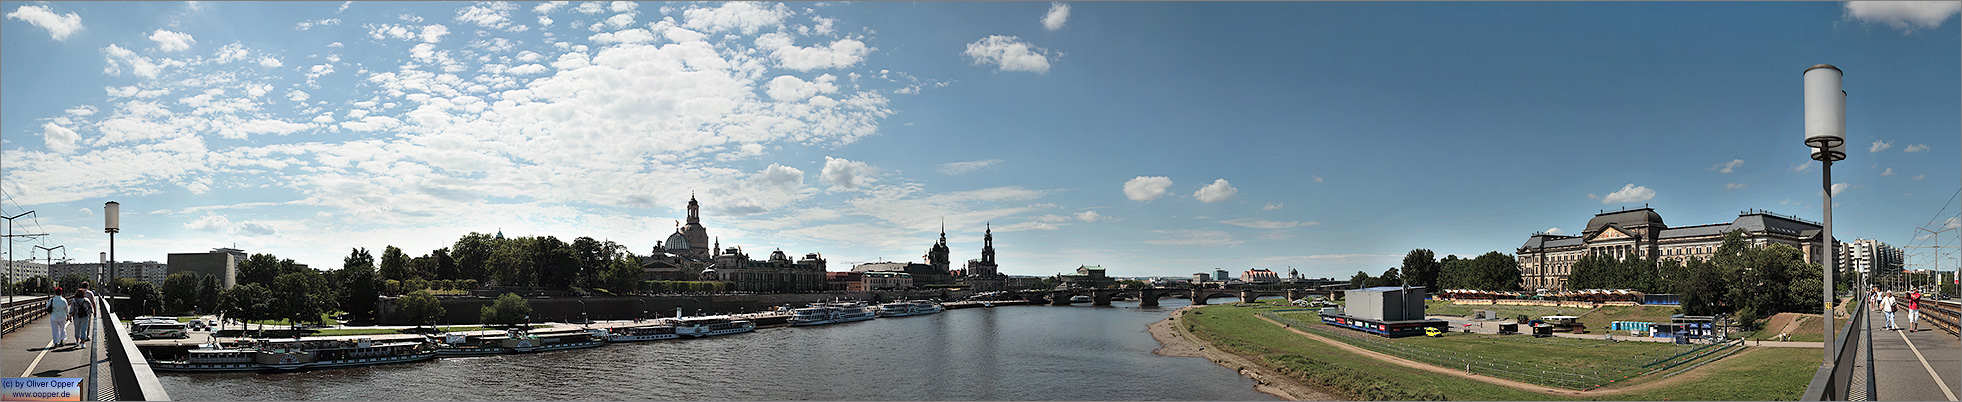 Panorama Dresden - (c) by Oliver Opper